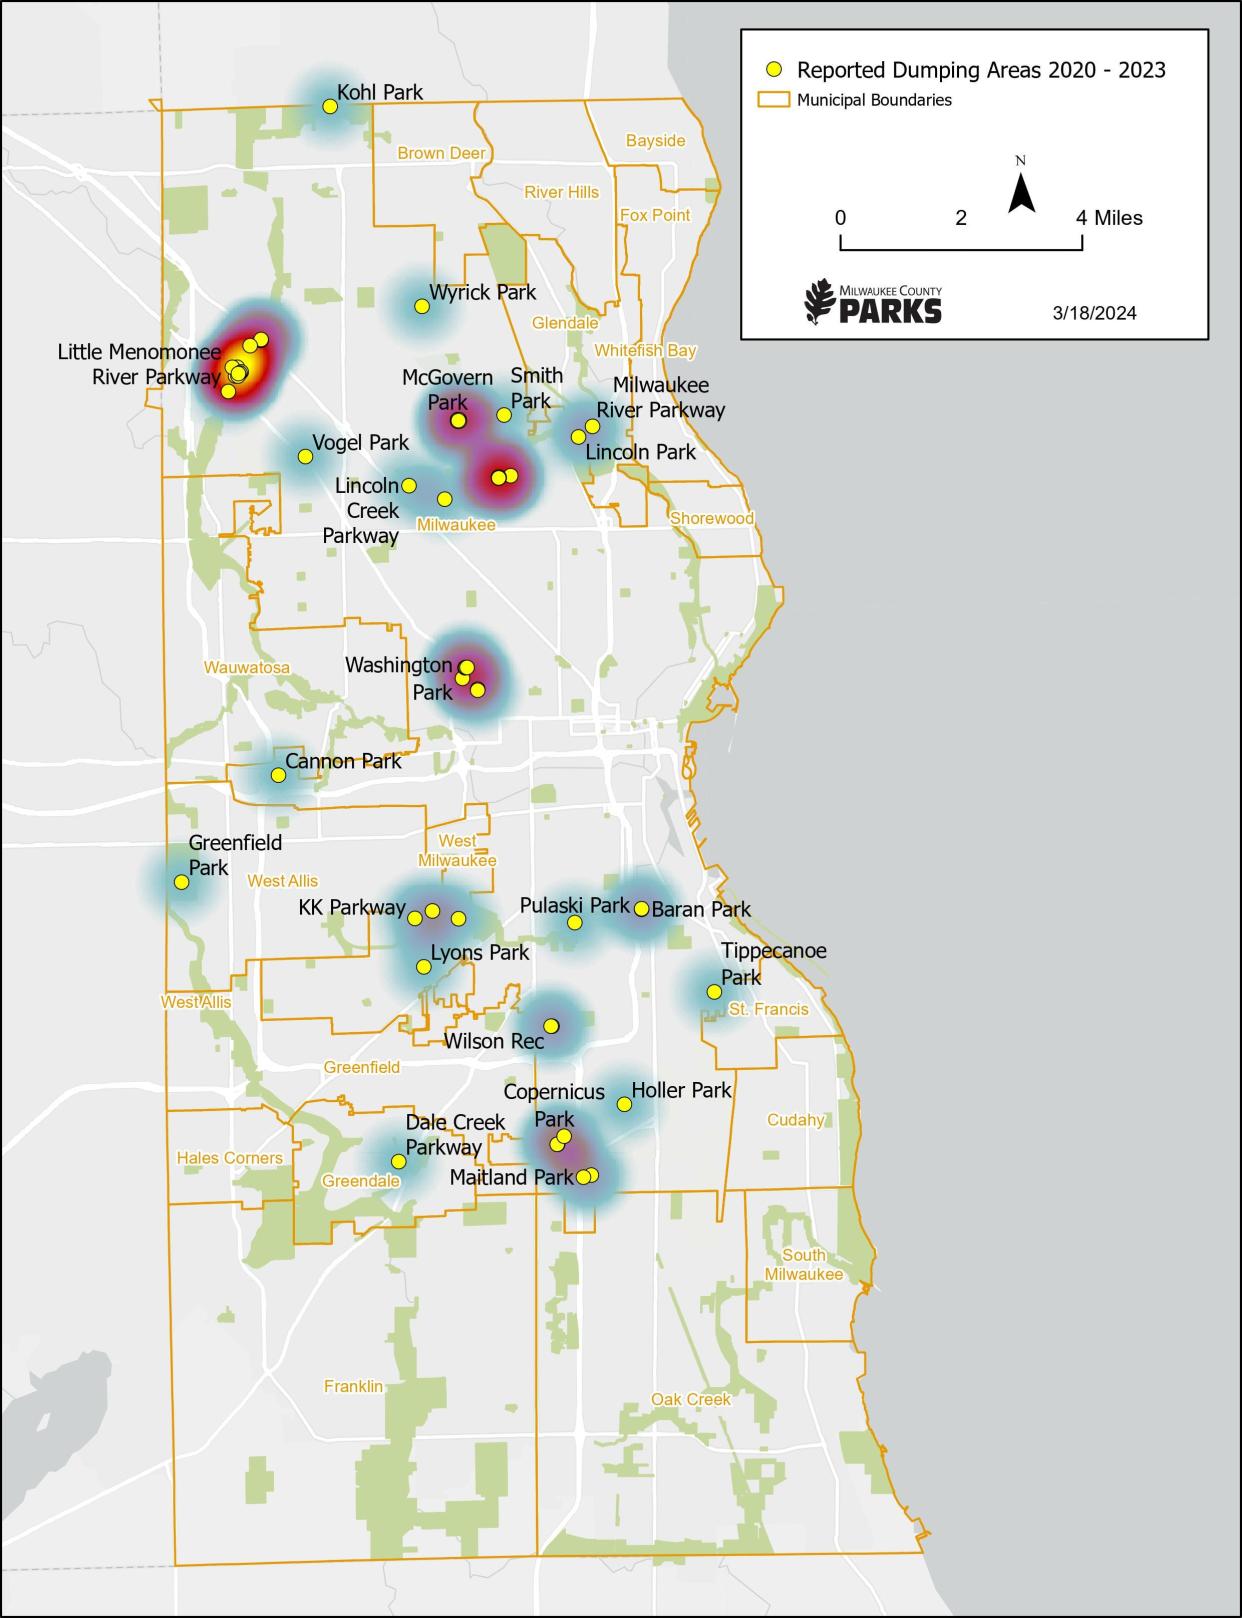 Reported dumping areas across Milwaukee County between 2020 and 2023.